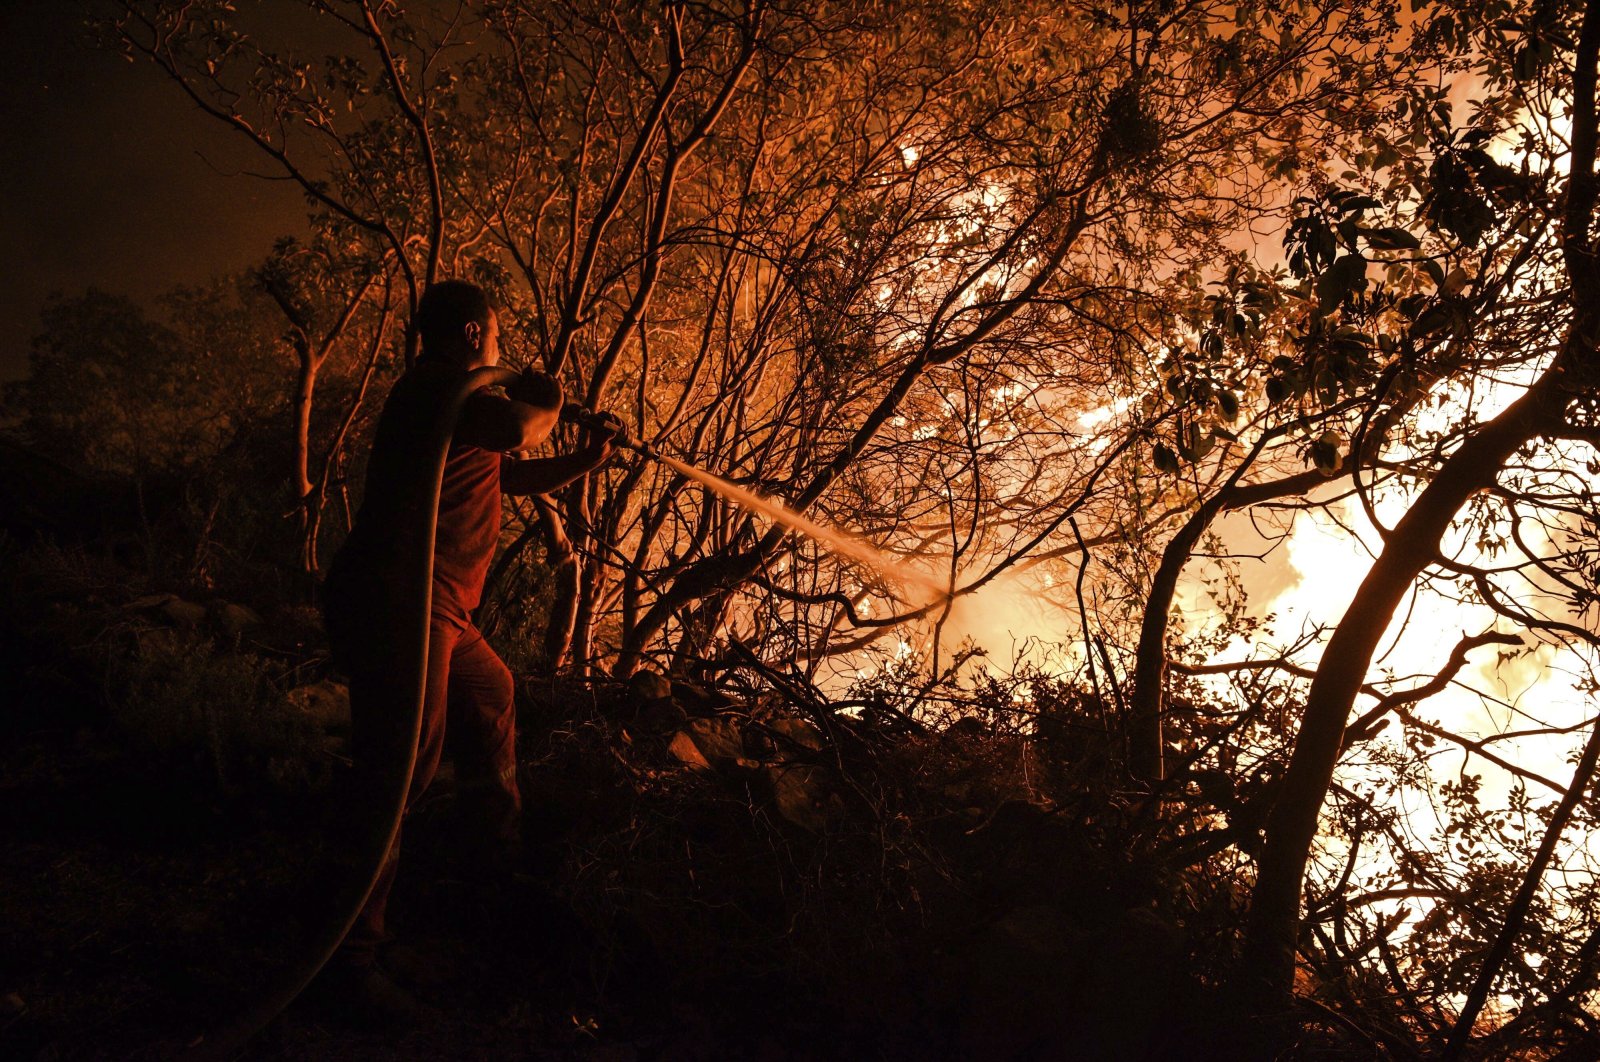 A firefighter battles with fires near the town of Manavgat, in Antalya province, southern Turkey, July 30, 2021. (AP Photo)